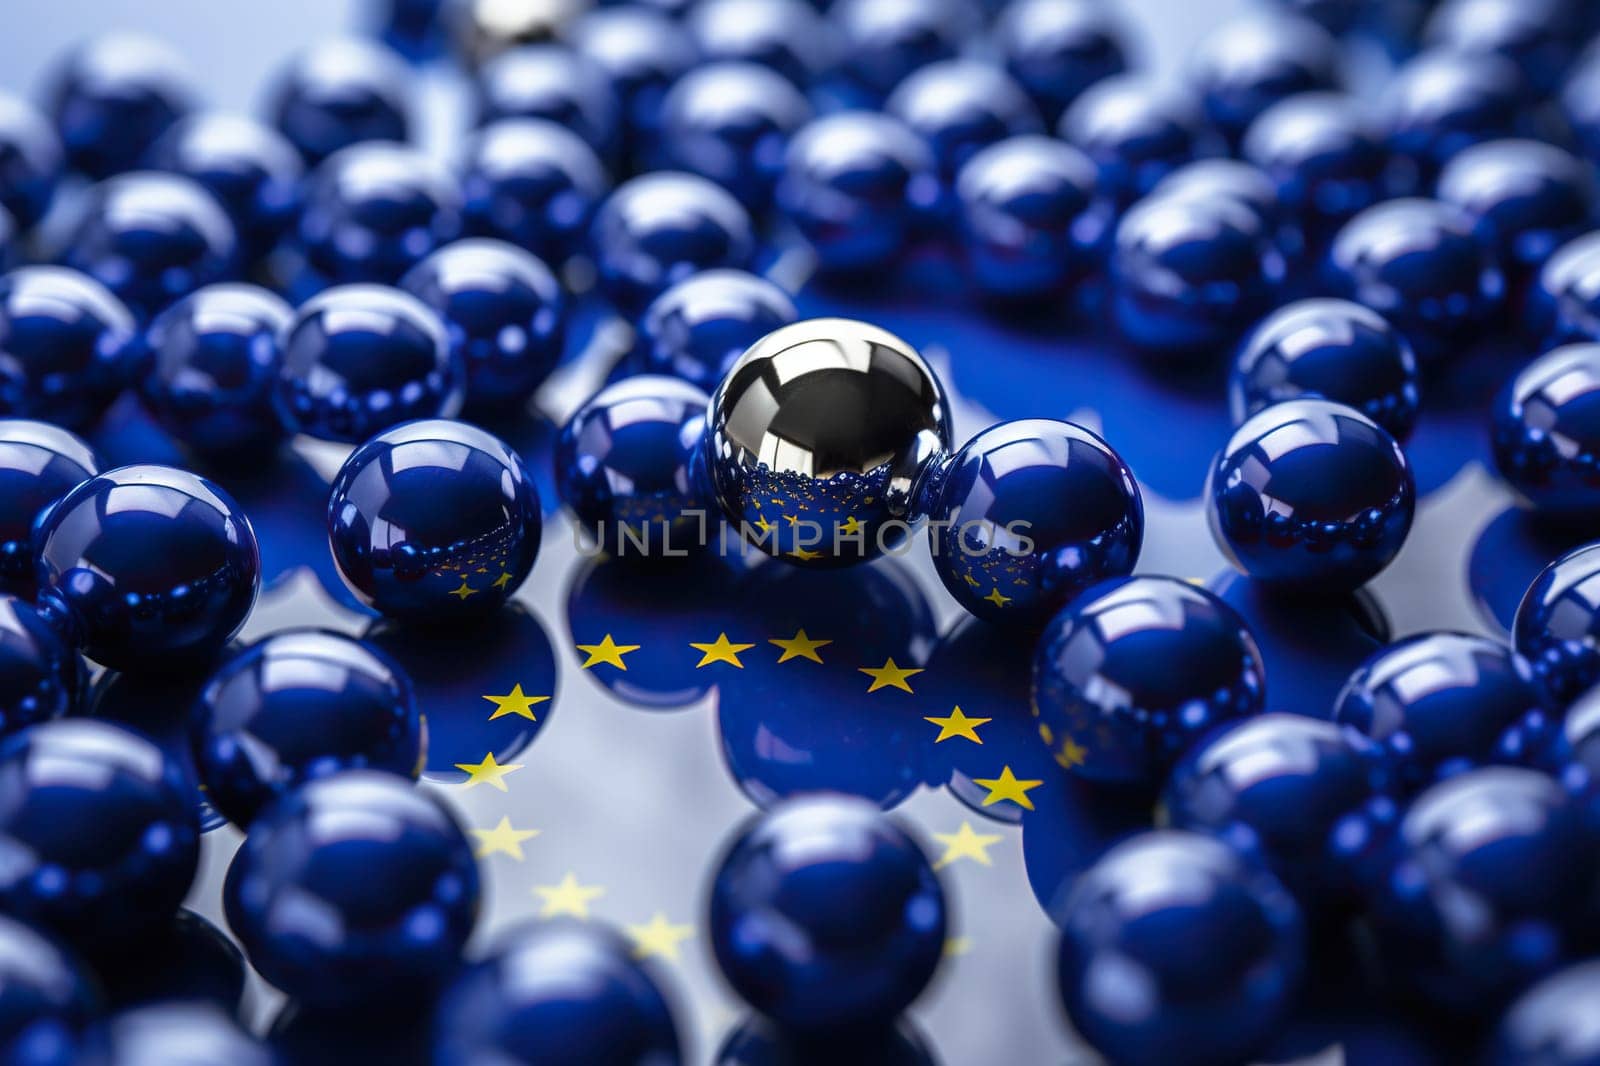 Blue glass balls with yellow stars. Symbol of the European Union.